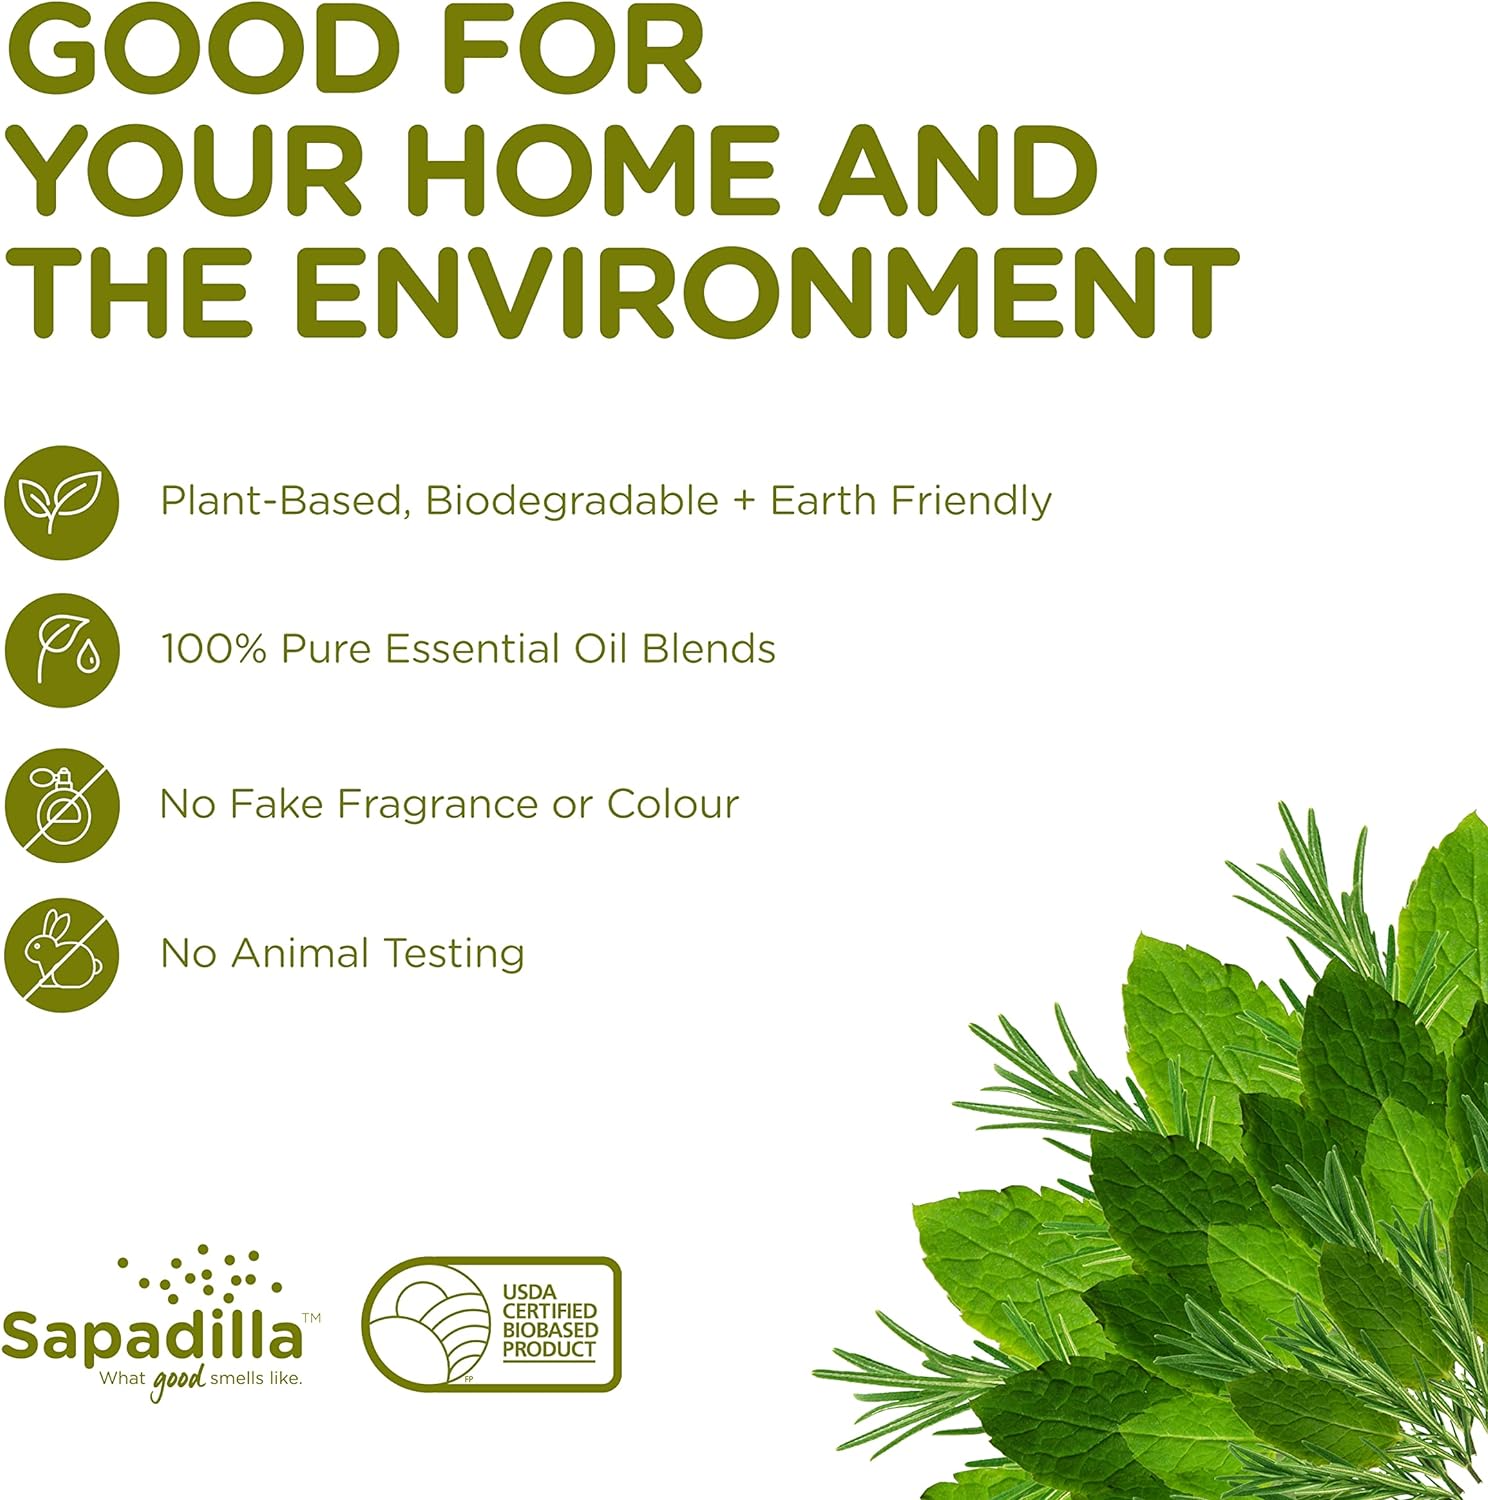 Sapadilla Liquid Dish Soap - Rosemary + Peppermint - Made with 100% Pure Essential Oil Blends, Tough on Grease, Aromatic & Fragrant Dishwashing Liquid, Plant Based, Biodegradable, 12 Ounce (Pack of 2) : Home & Kitchen